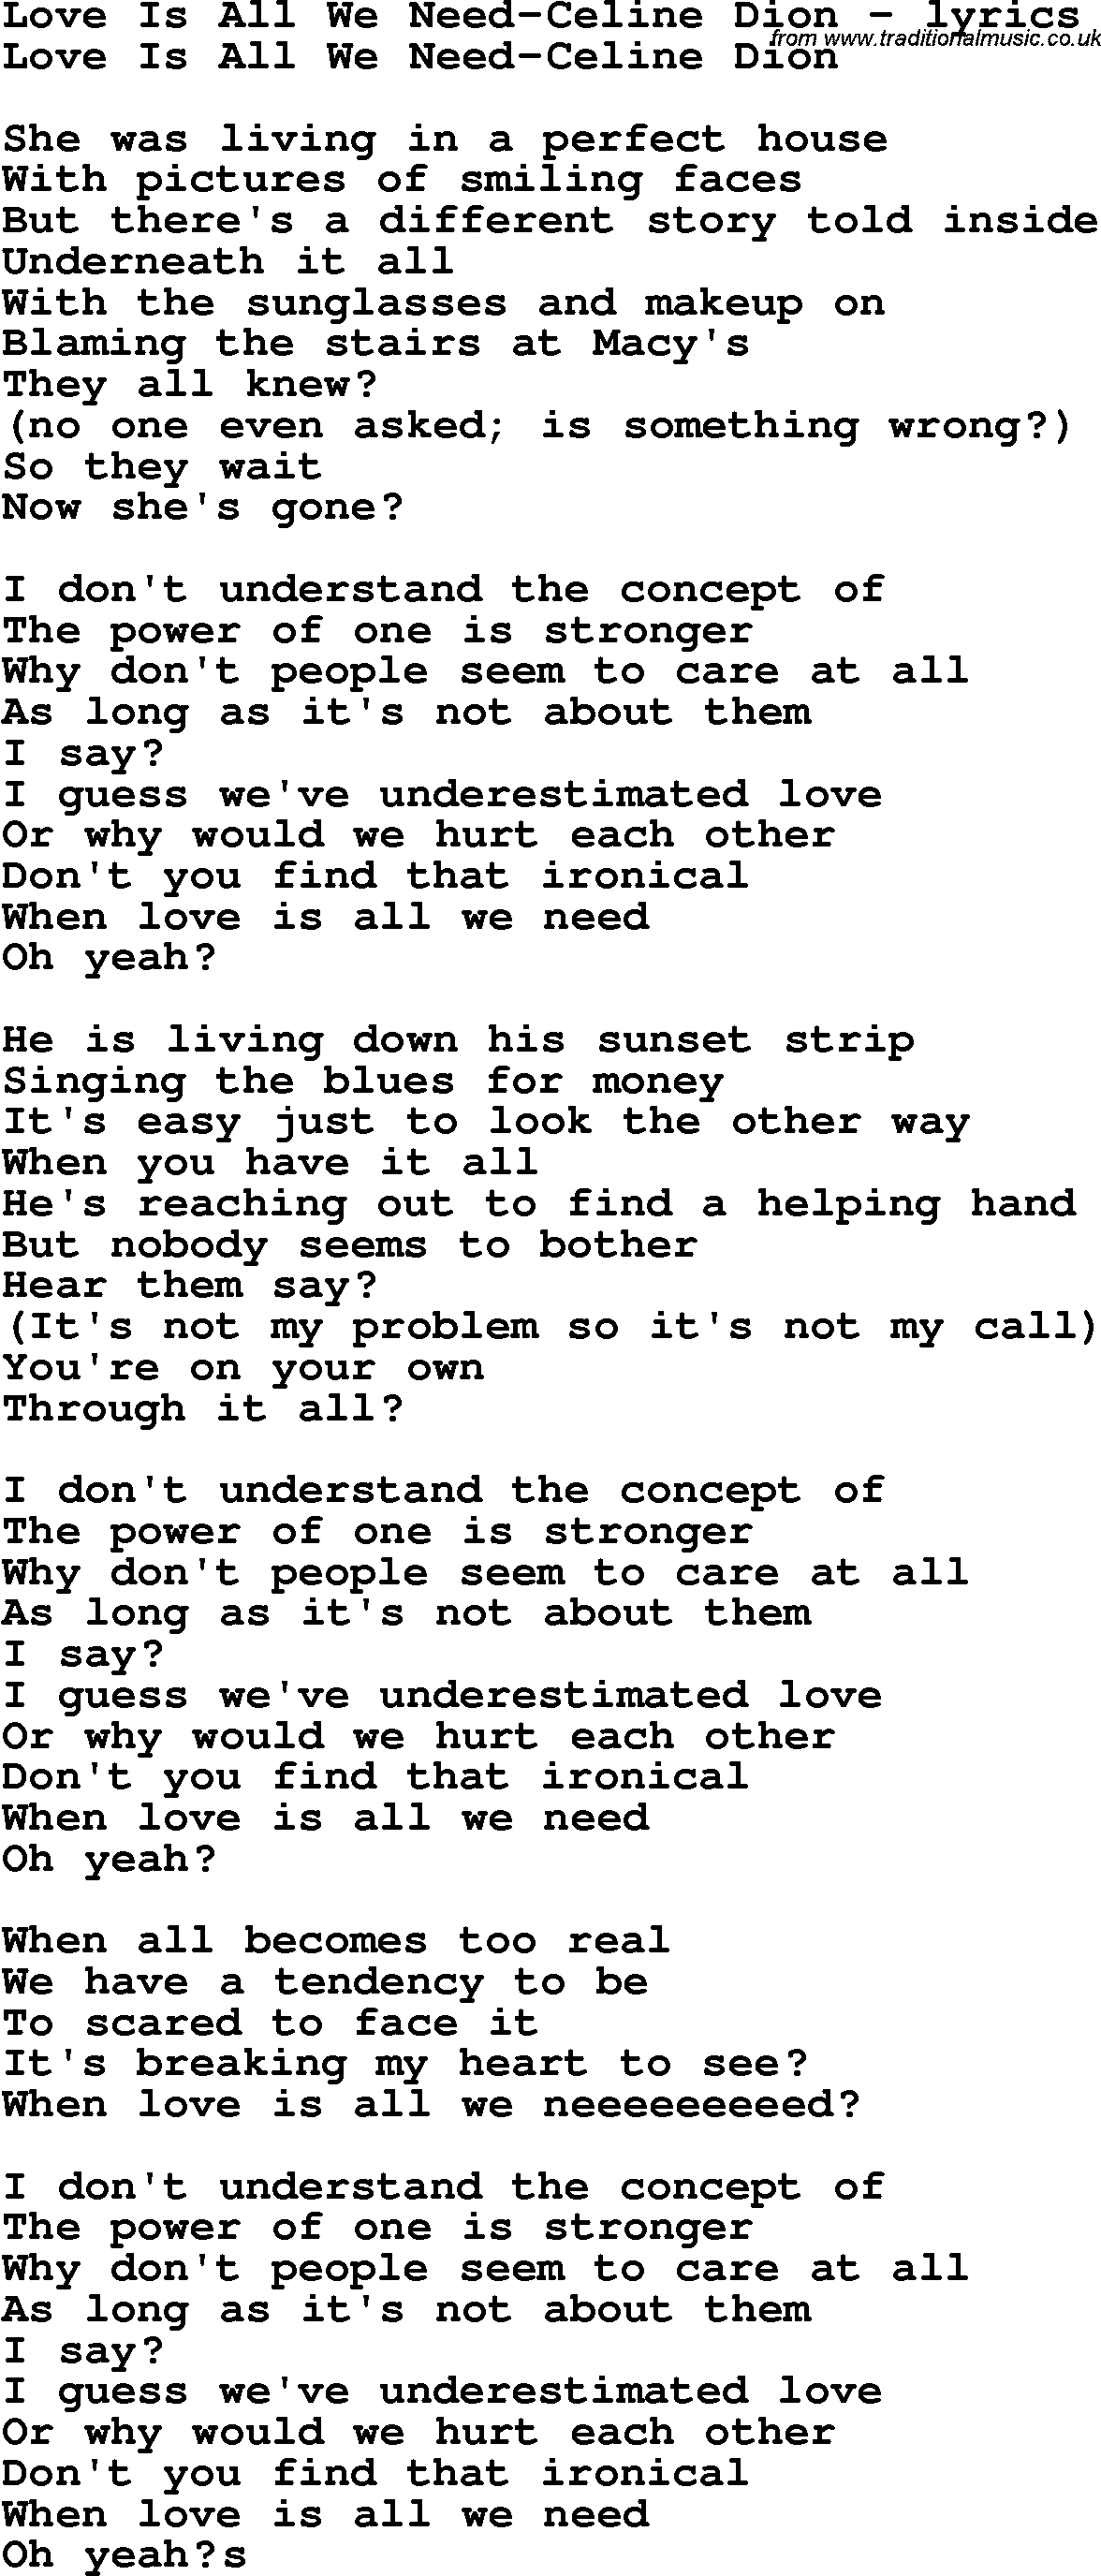 Love Song Lyrics for: Love Is All We Need-Celine Dion